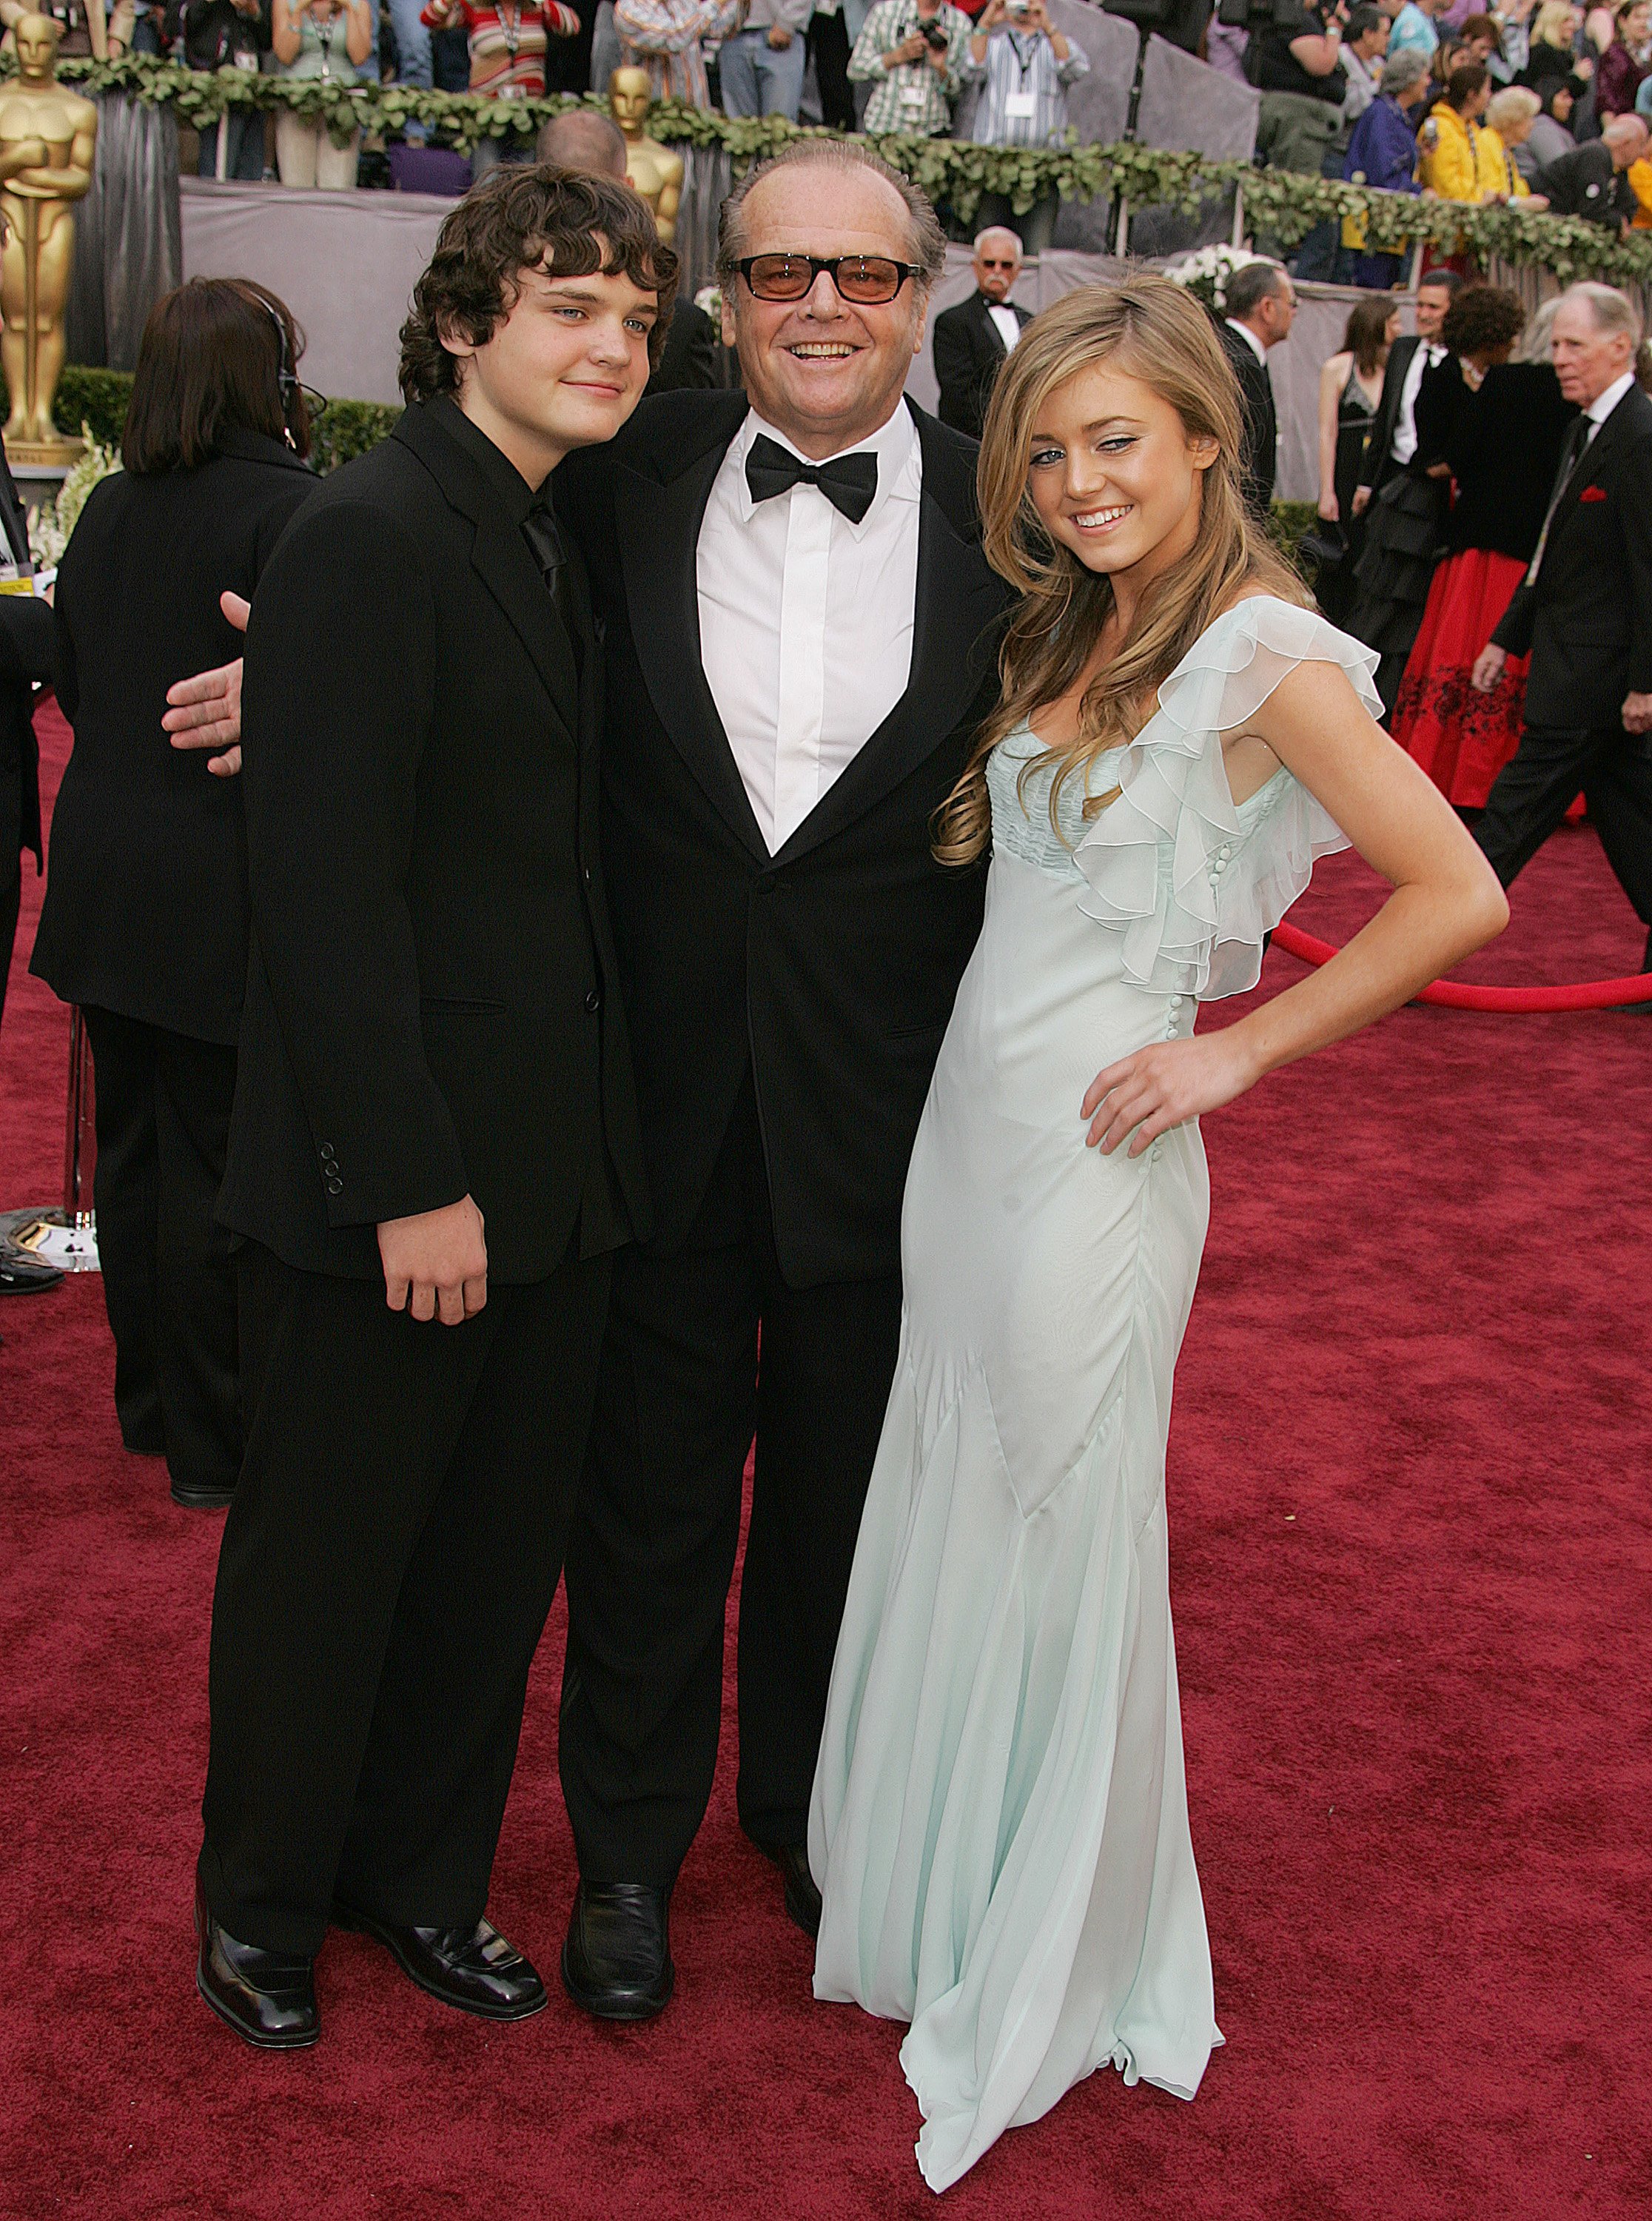 The 78th Annual Academy Awards - Arrivals Jack Nicholson (center) with Raymond Nicholson and Lorraine Nicholson | Source: Getty Images